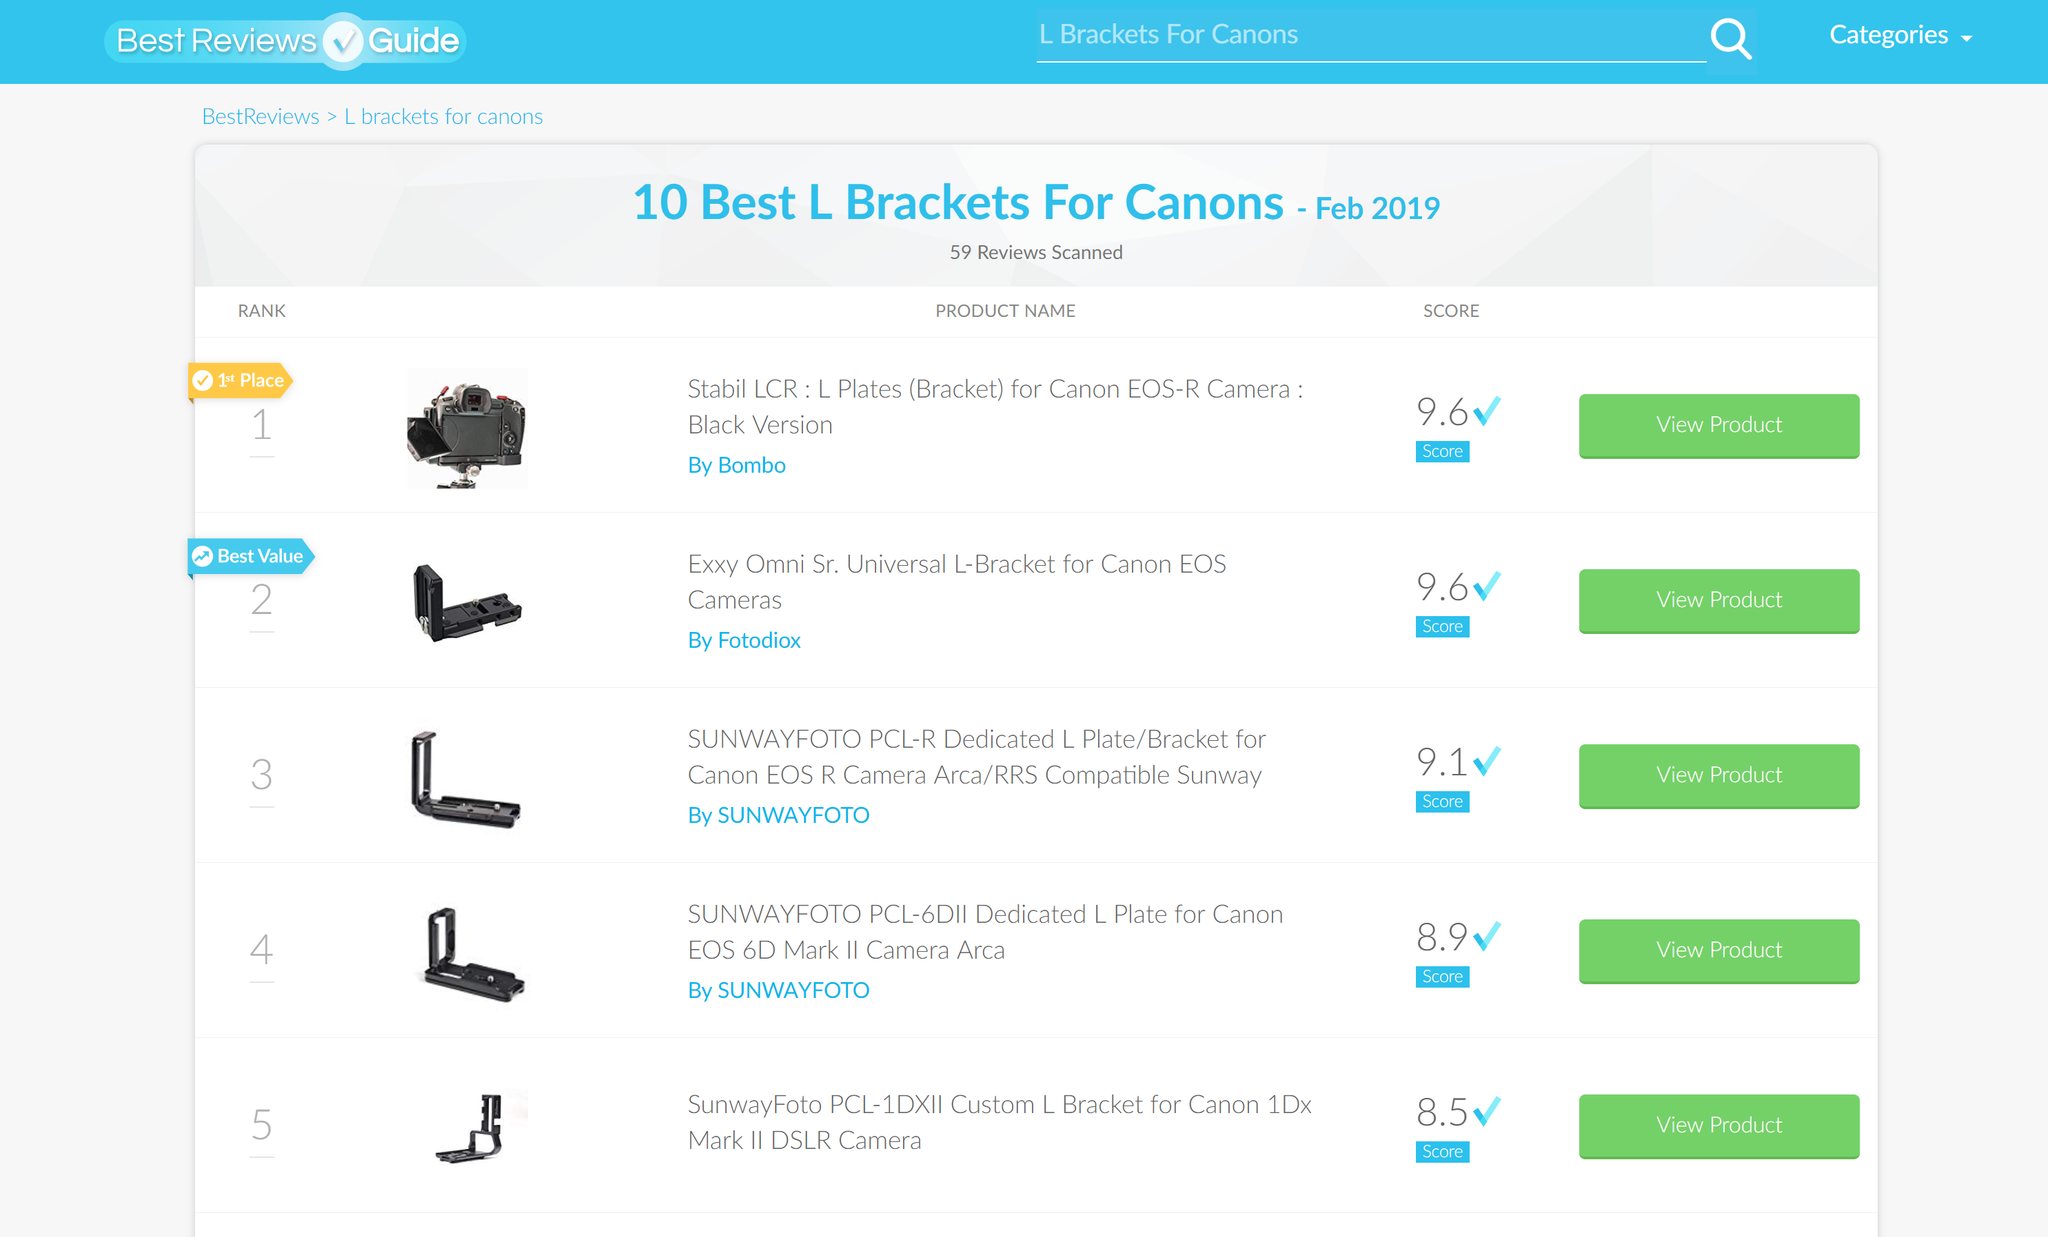 Stabil LCR : Best of top 10 best L Plates (Bracket) for Canon EOS-R